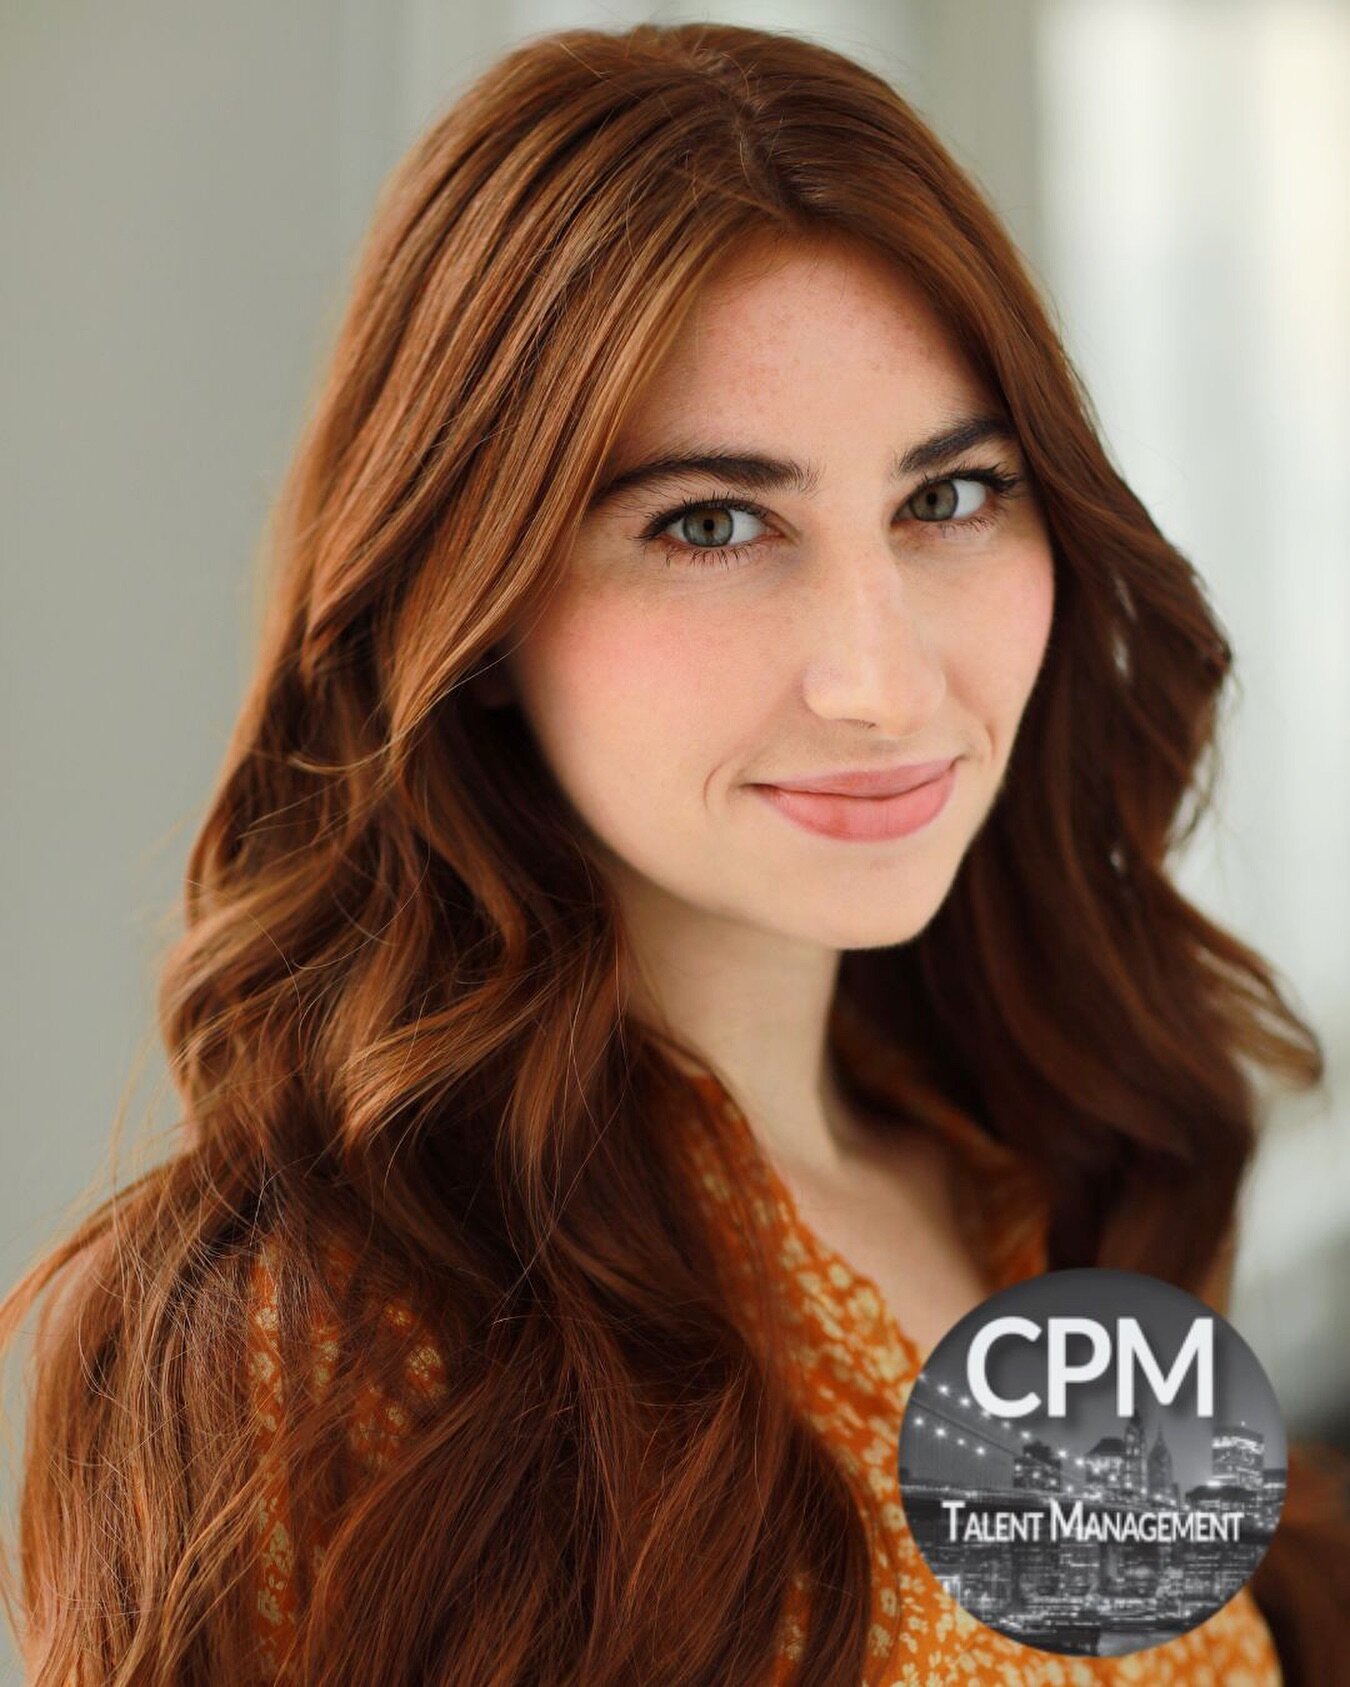 Now represented by @cpmtalent !!!
.
.
.
Exuberantly optimistic ~ when you meet a manager who understands and is excited about your professional growth and artistry. 🎭
.
.
#actorslife #nycactor #nycmodel #newenglandactor